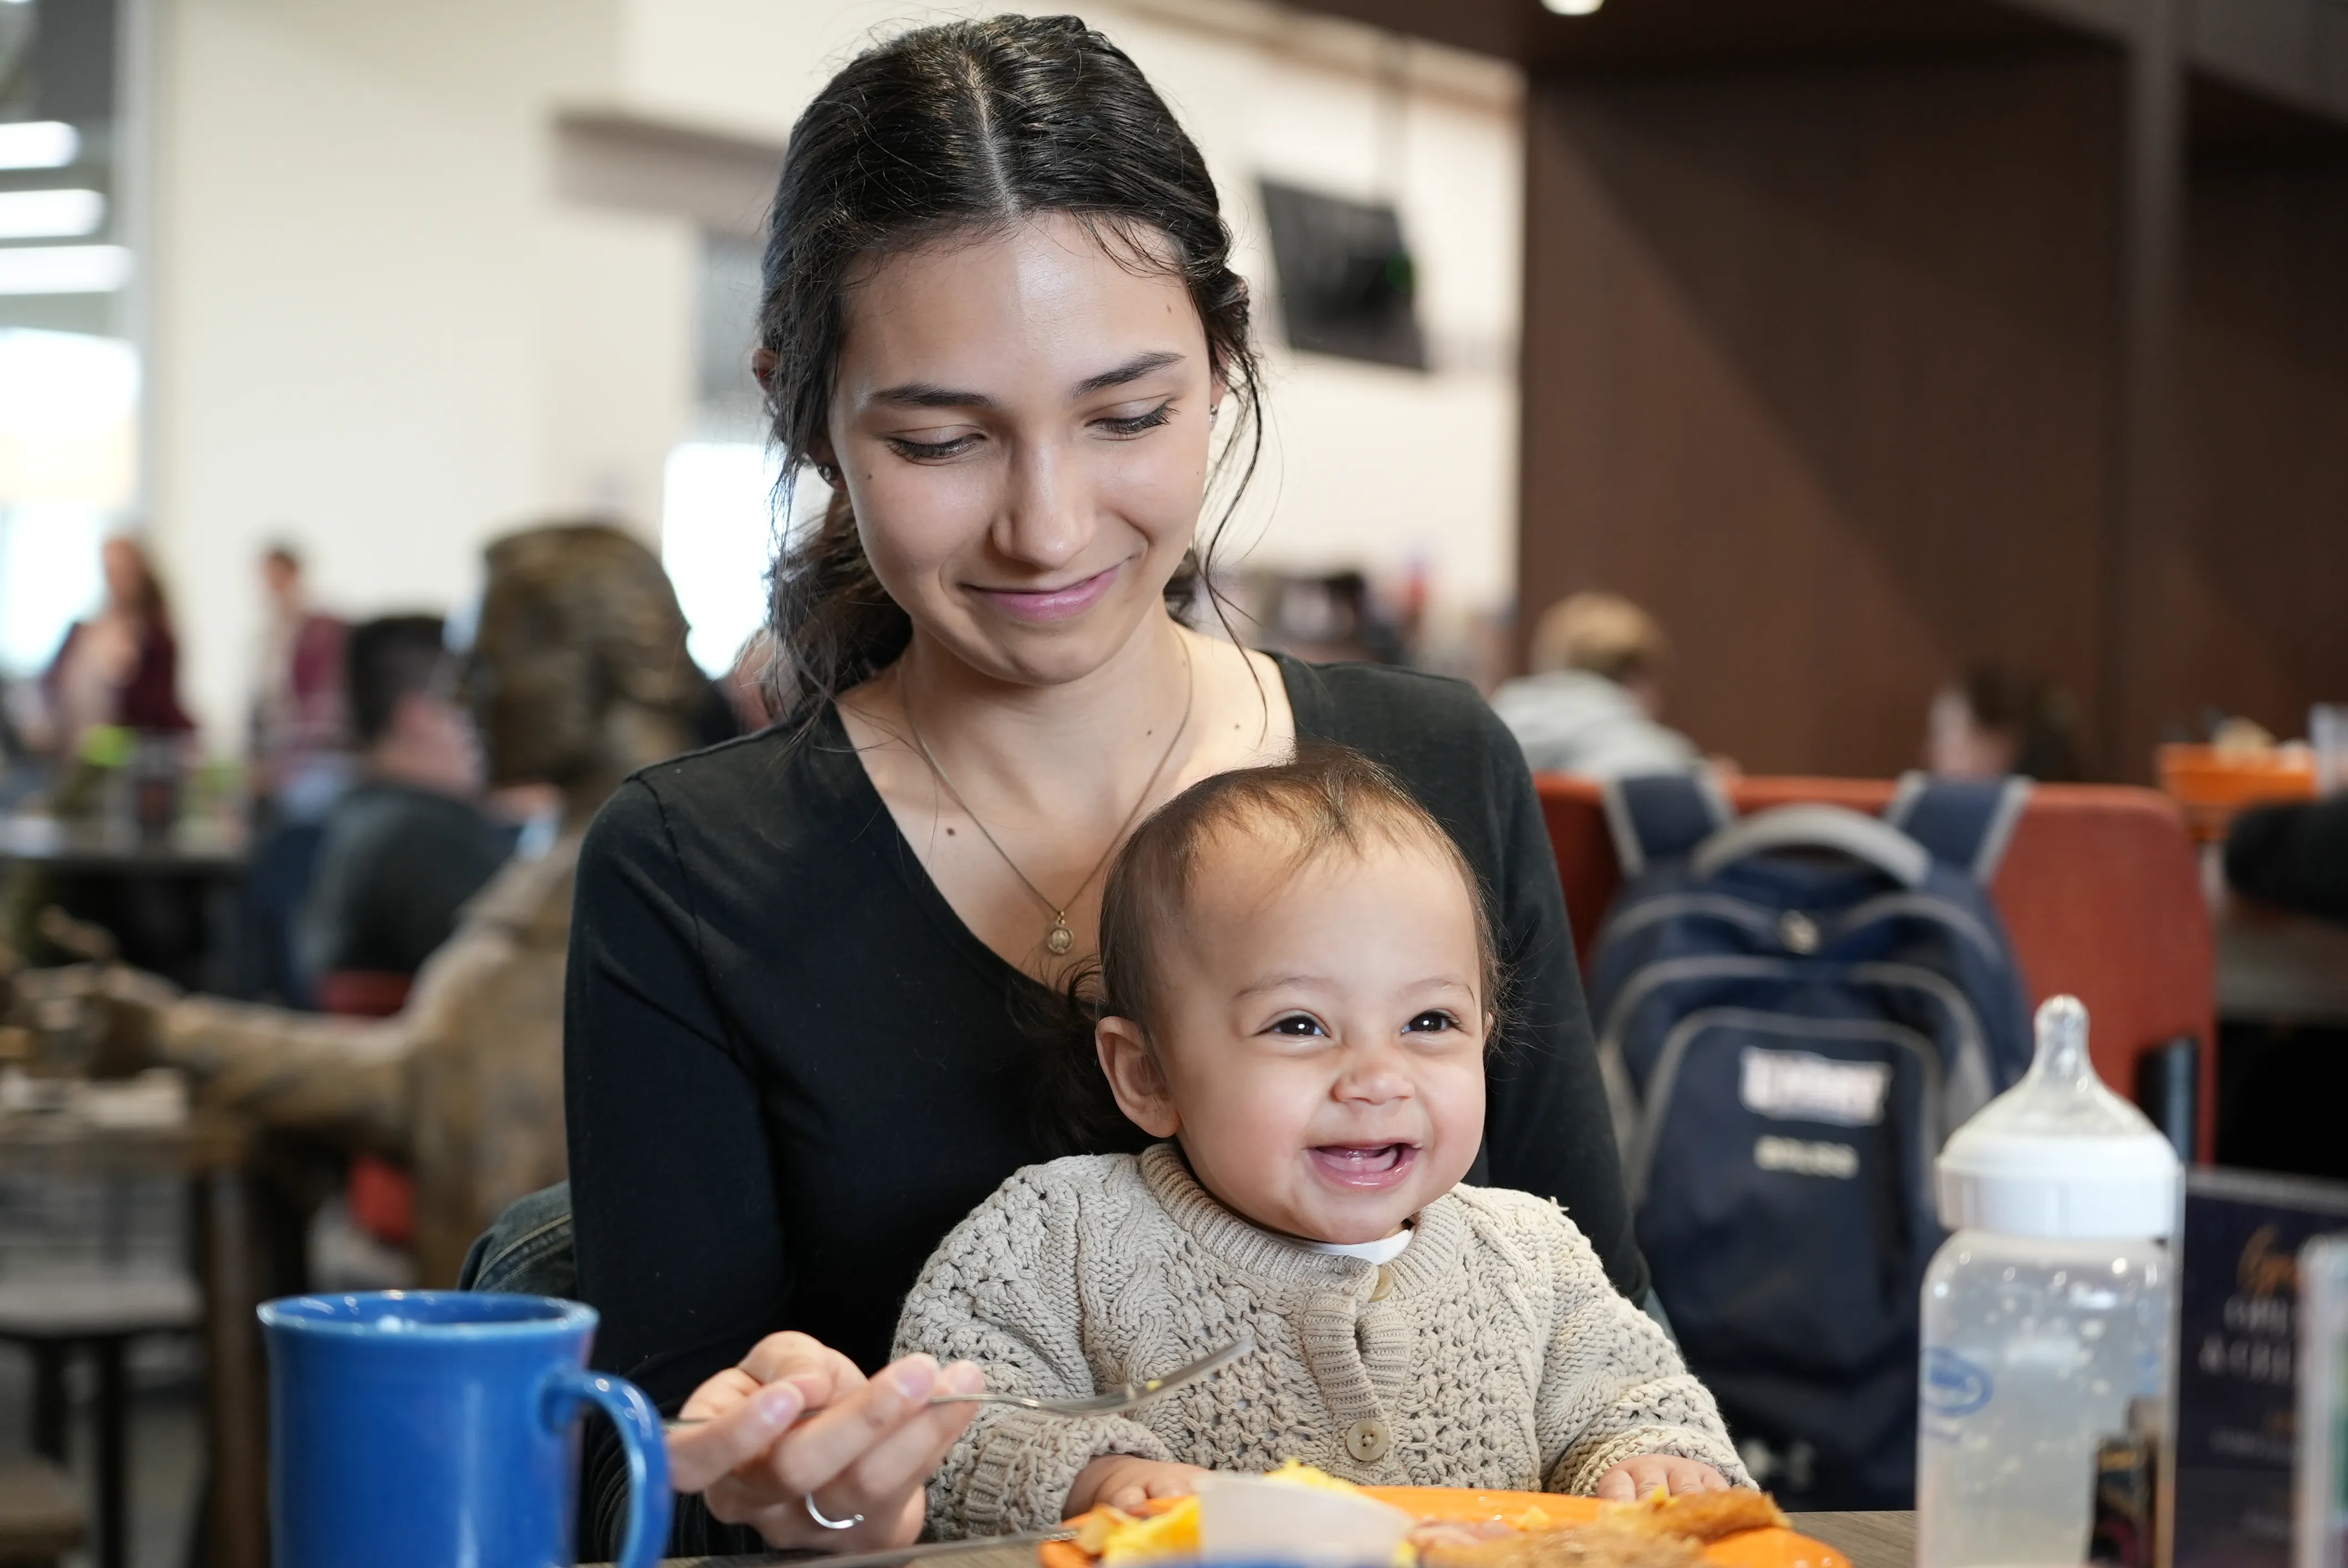 Katie Chihoski, a student at the University of Mary in Bismarck, North Dakota, eats with her baby, Lucia, on her lap in the company of fellow students. Chihoski is among the first students to benefit from a new initiative at the Catholic college called the Saint Teresa of Calcutta Community for Mothers, which provides free babysitting and other material support for young mothers on campus.?w=200&h=150